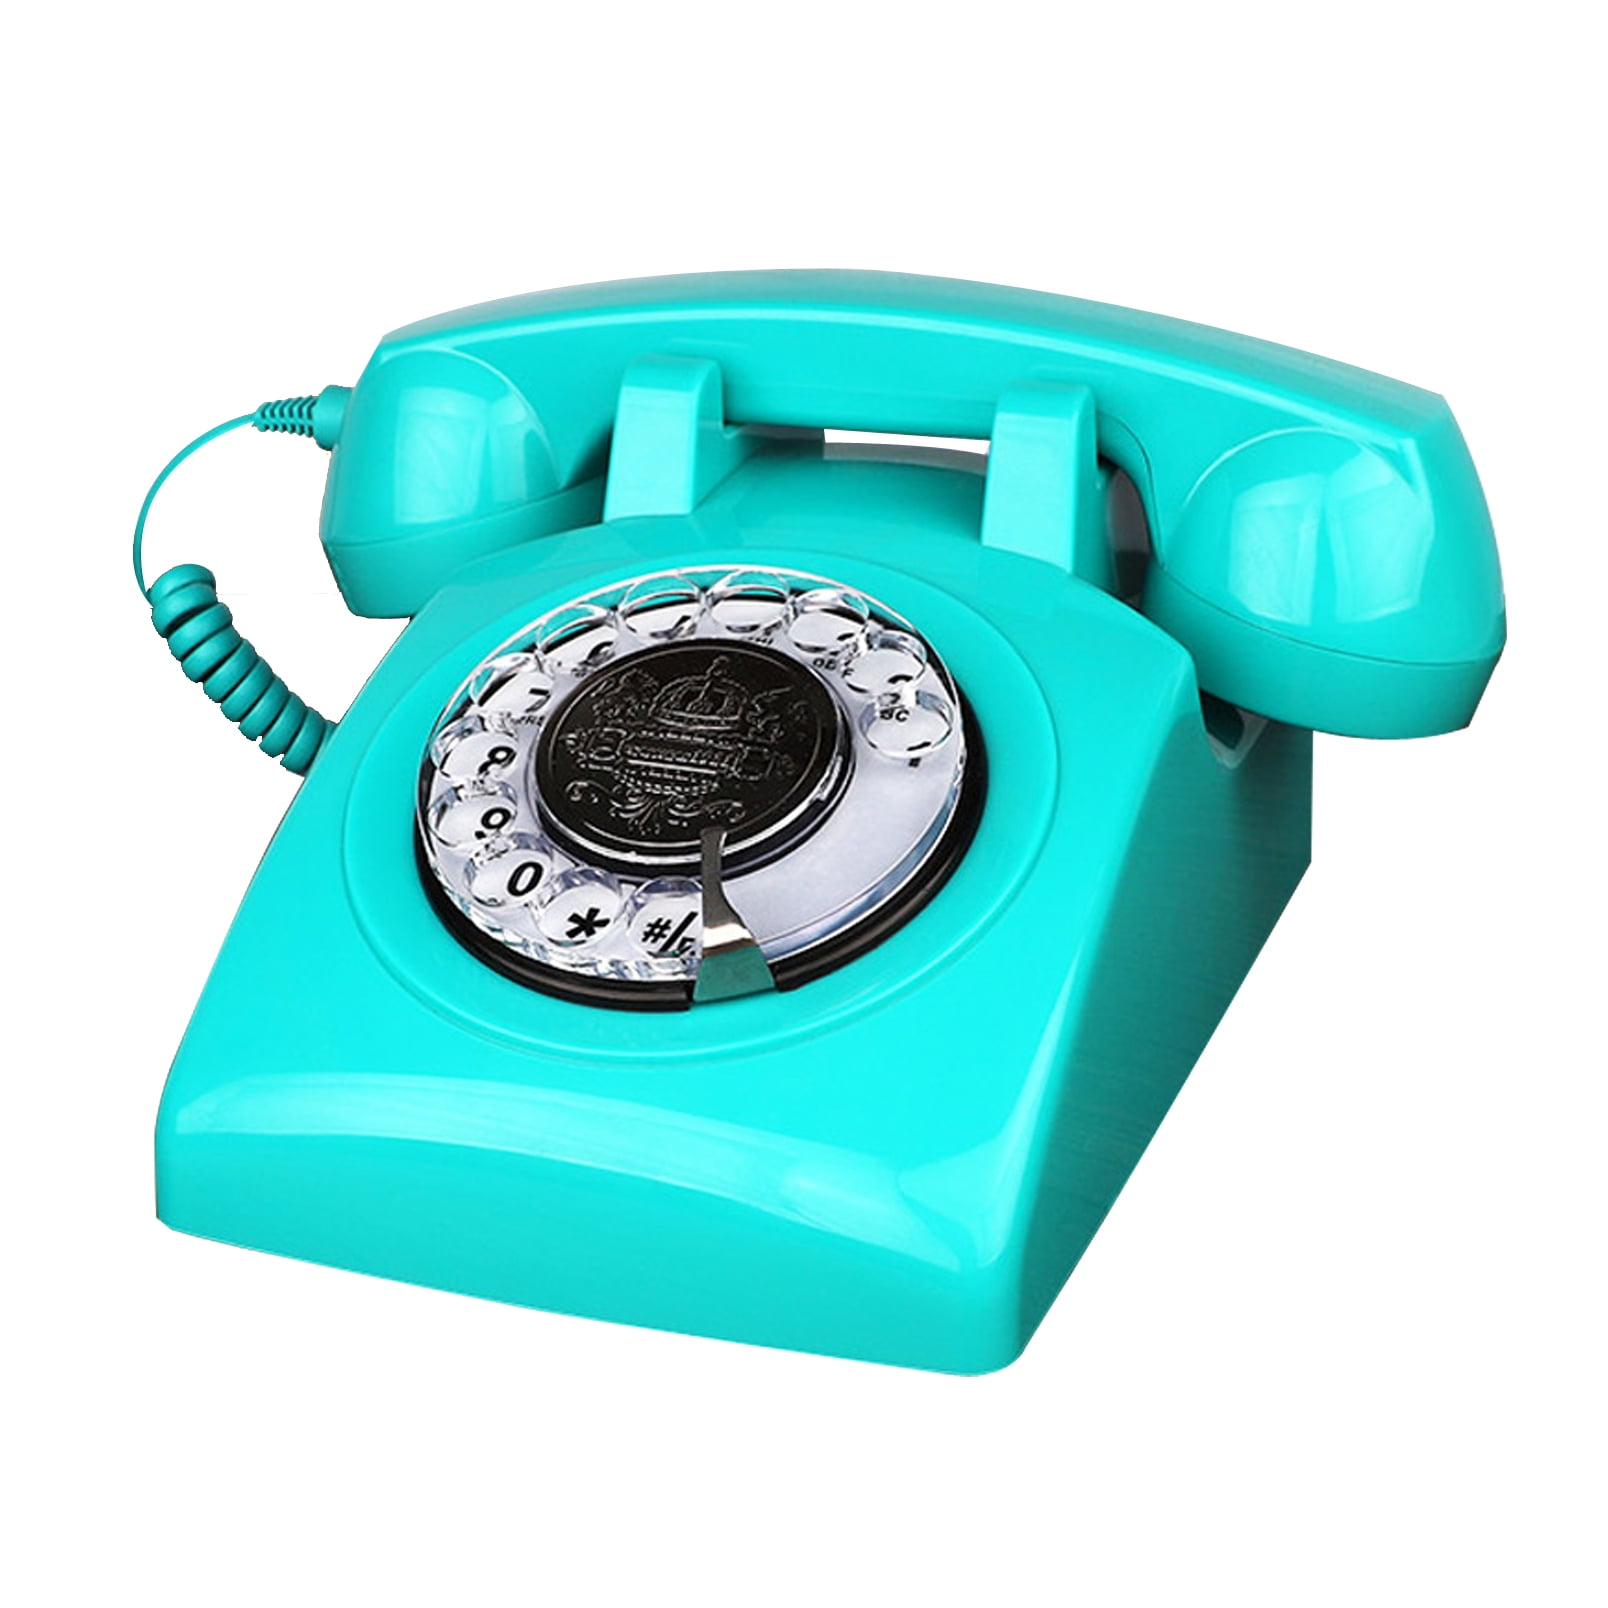 Corded Retro Phone, TelPal Vintage Old Phones, Classic 1930's Antique  Landline Phones for Home & Office Decor, Novelty Hotel Telephone with Redial